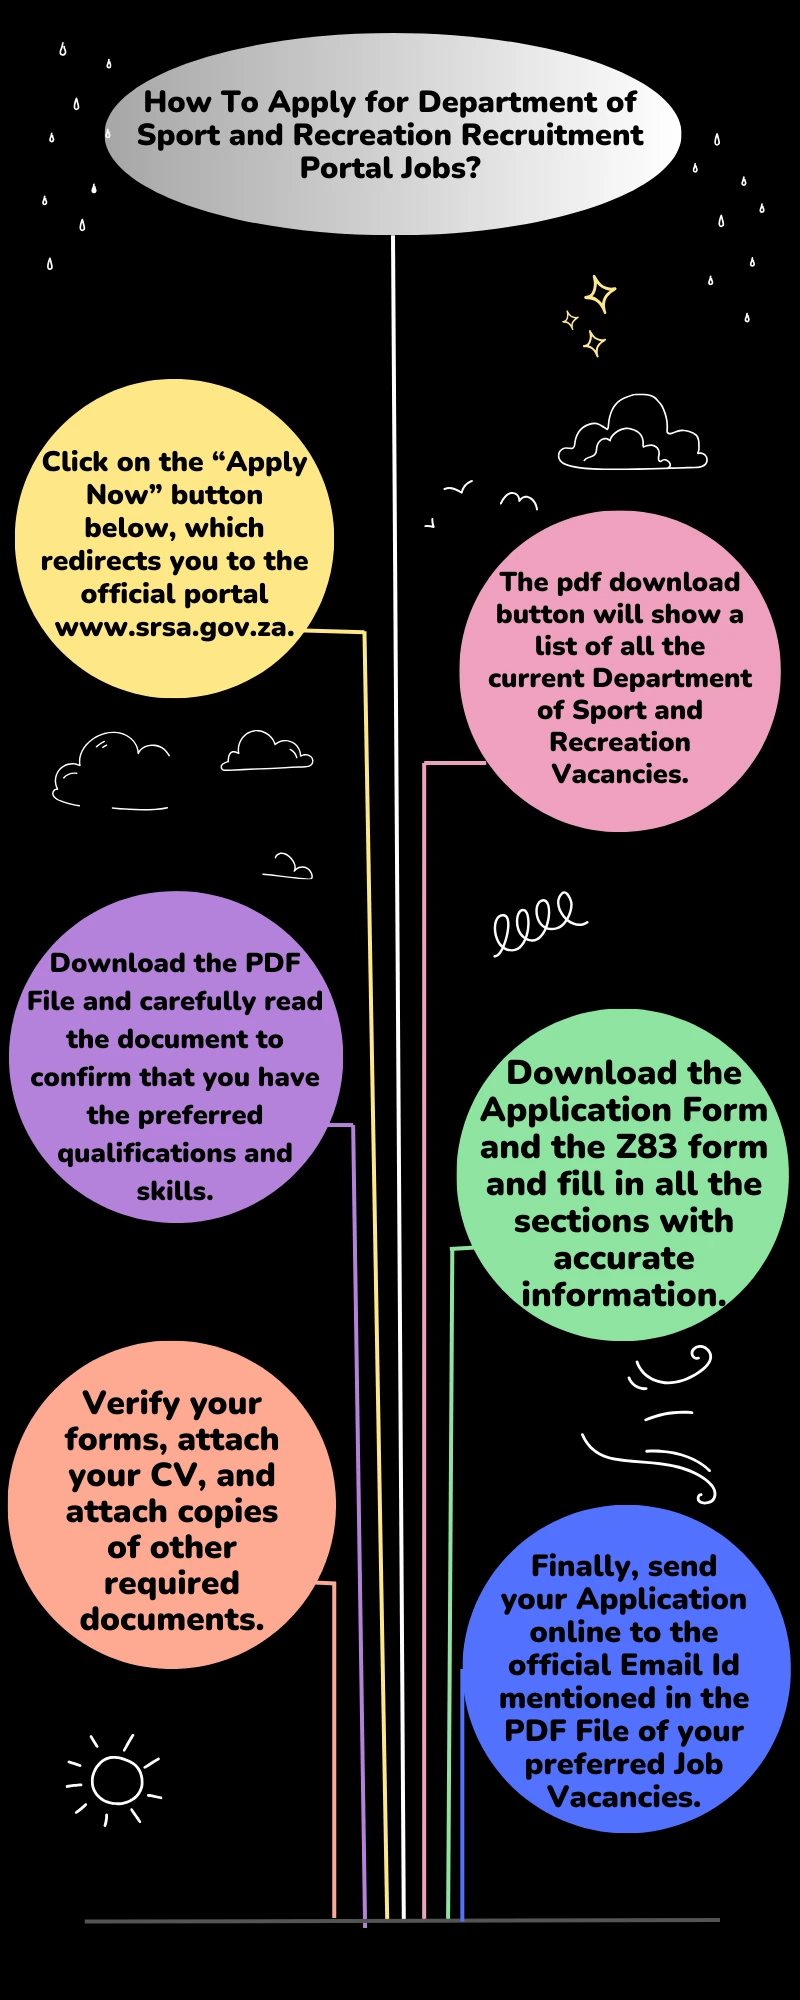 How To Apply for Department of Sport and Recreation Recruitment Portal Jobs?